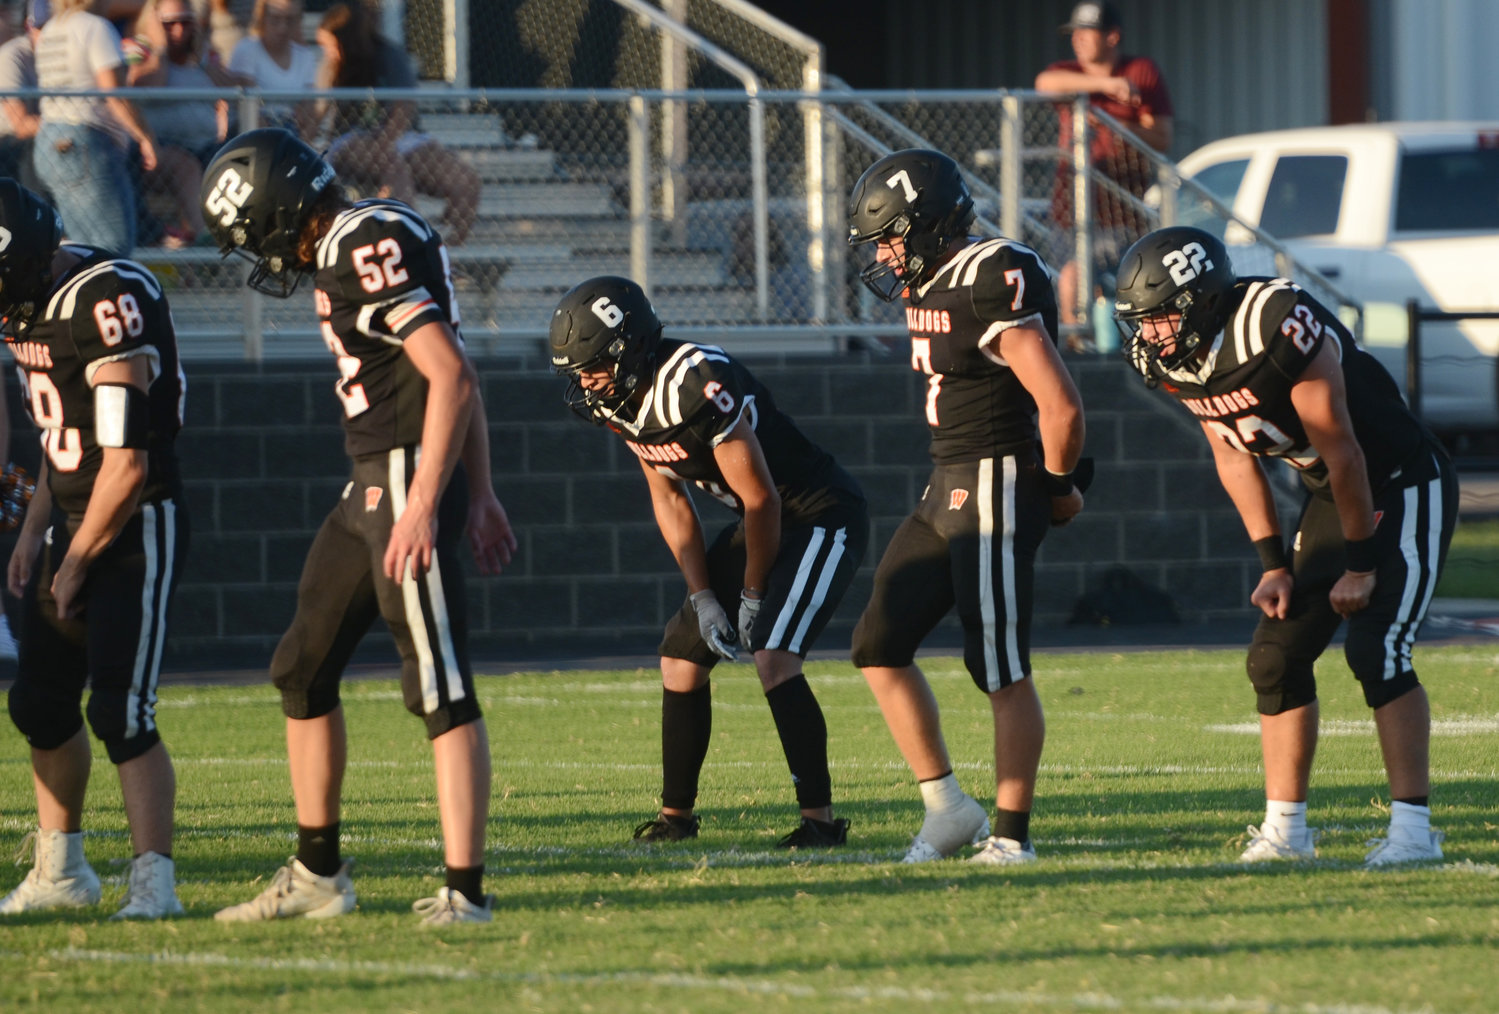 The Wayne offense racked up 473 yards rushing and seven touchdowns Friday night thanks in part to the play of linemen Maddox Mantooth (68) and Kevin Bynum (52), as well as backs Jairo Hernandez (6), Ethan Mullins (7) and Brannon Lewelling (22). The Bulldogs defeated Walters 48-16. They travel to Lexington Friday for a 7:30 p.m. kick.